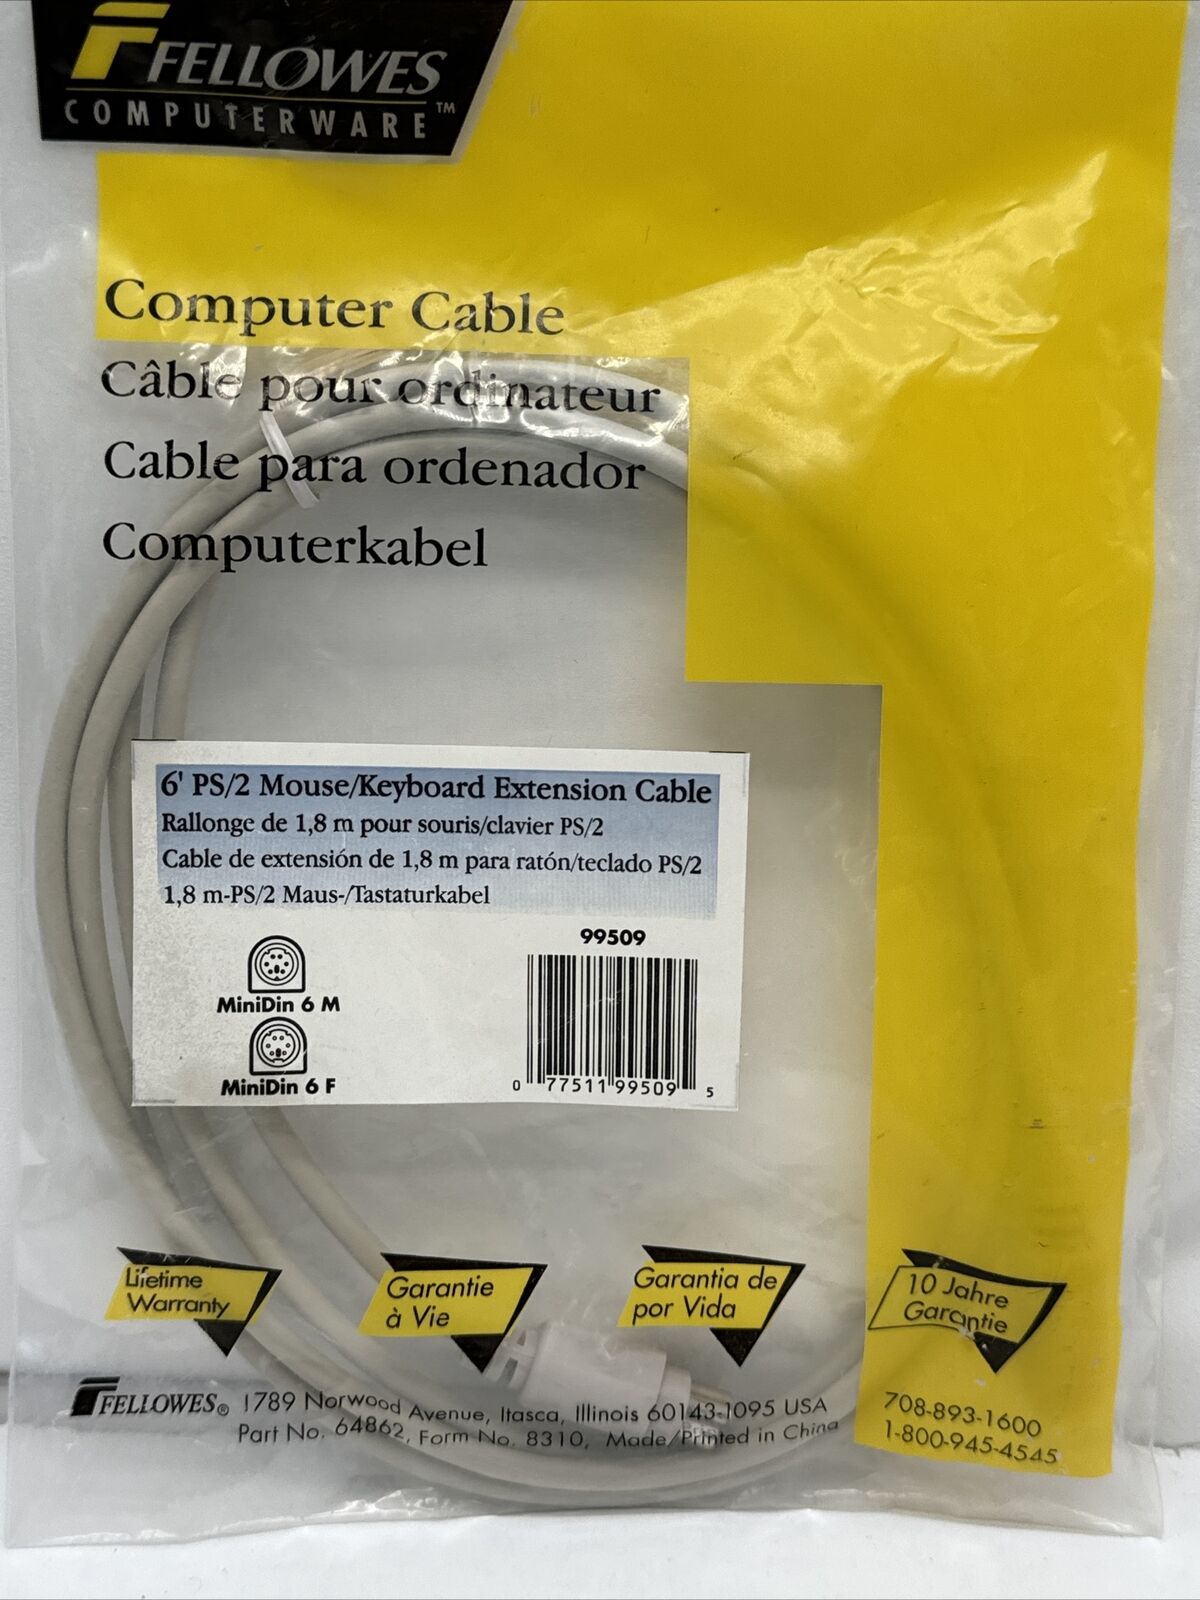 Mouse Keyboard Extension Cable Fellowes 99509 PS/2 MiniDin 6M/MiniDin 6F 6 Foot